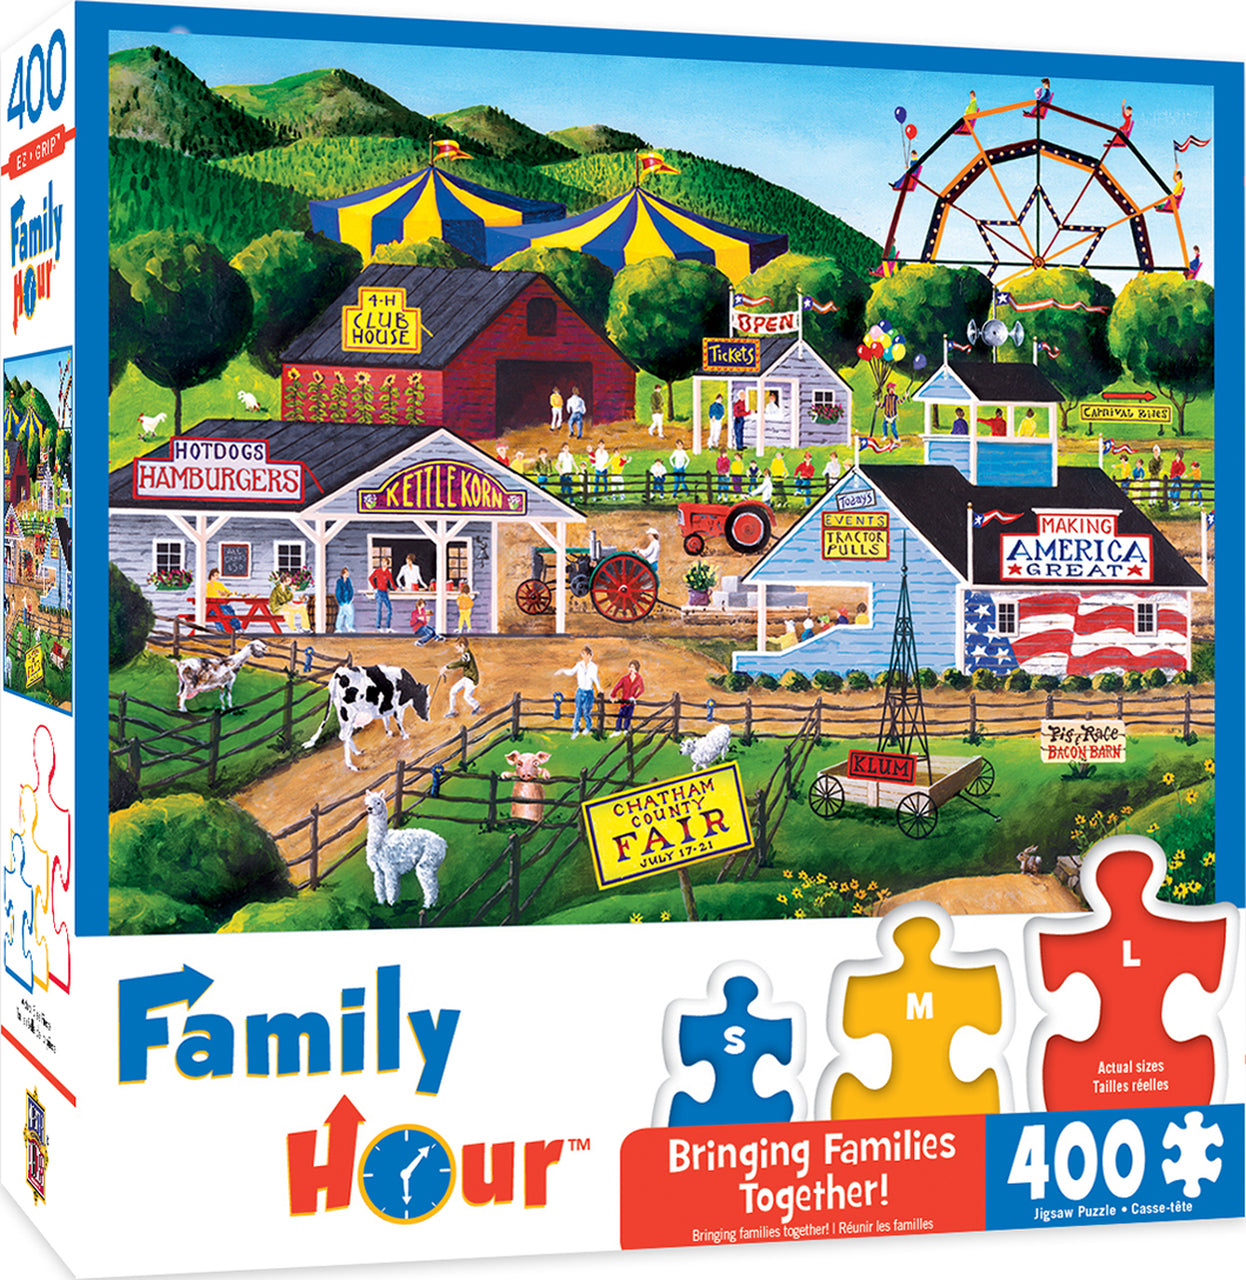 Family Hour Summer Carnival Large 400 Piece EZGrip Jigsaw Puzzle by Masterpieces